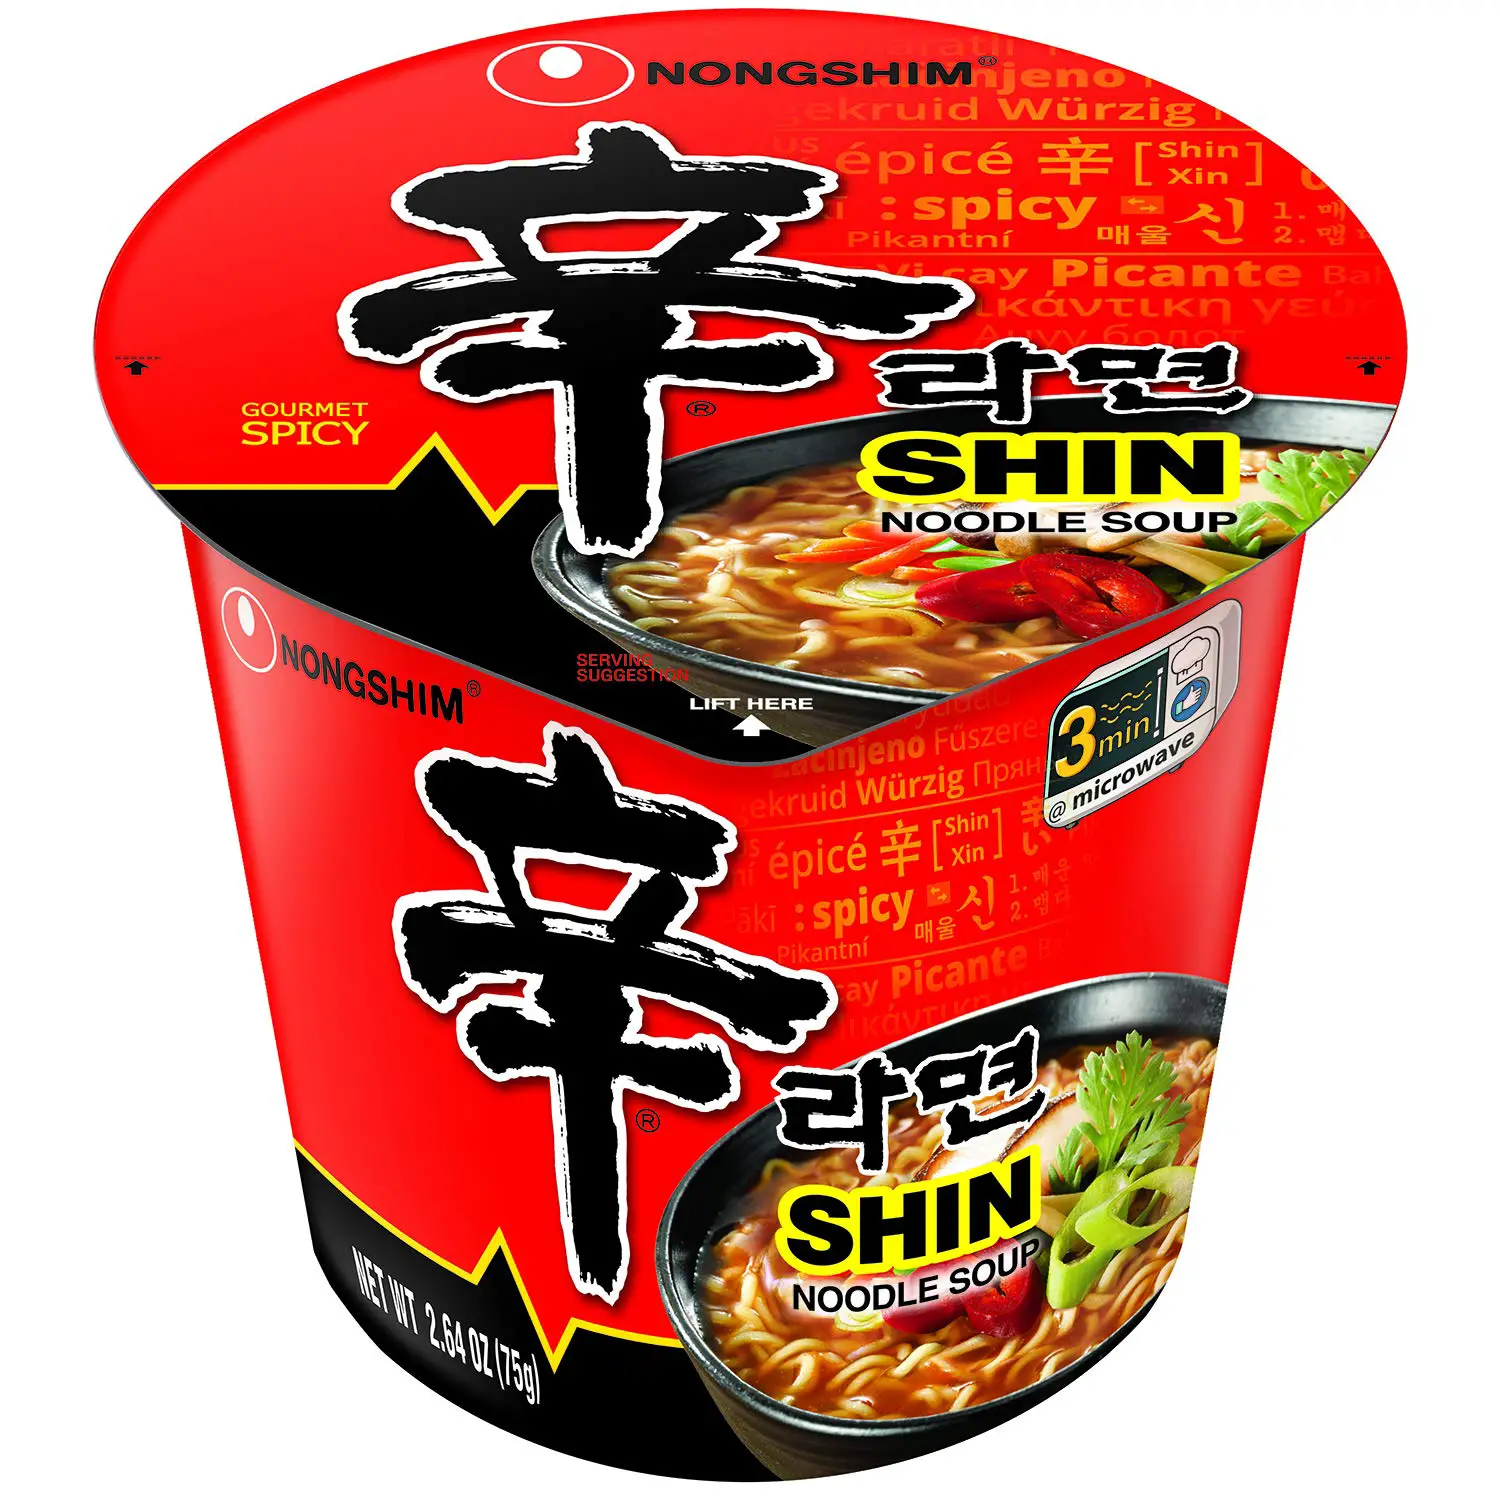 Nongshim Shin Cup Noodle Soup, Gourmet Spicy, 2.64 Ounce (Pack of 6 ...